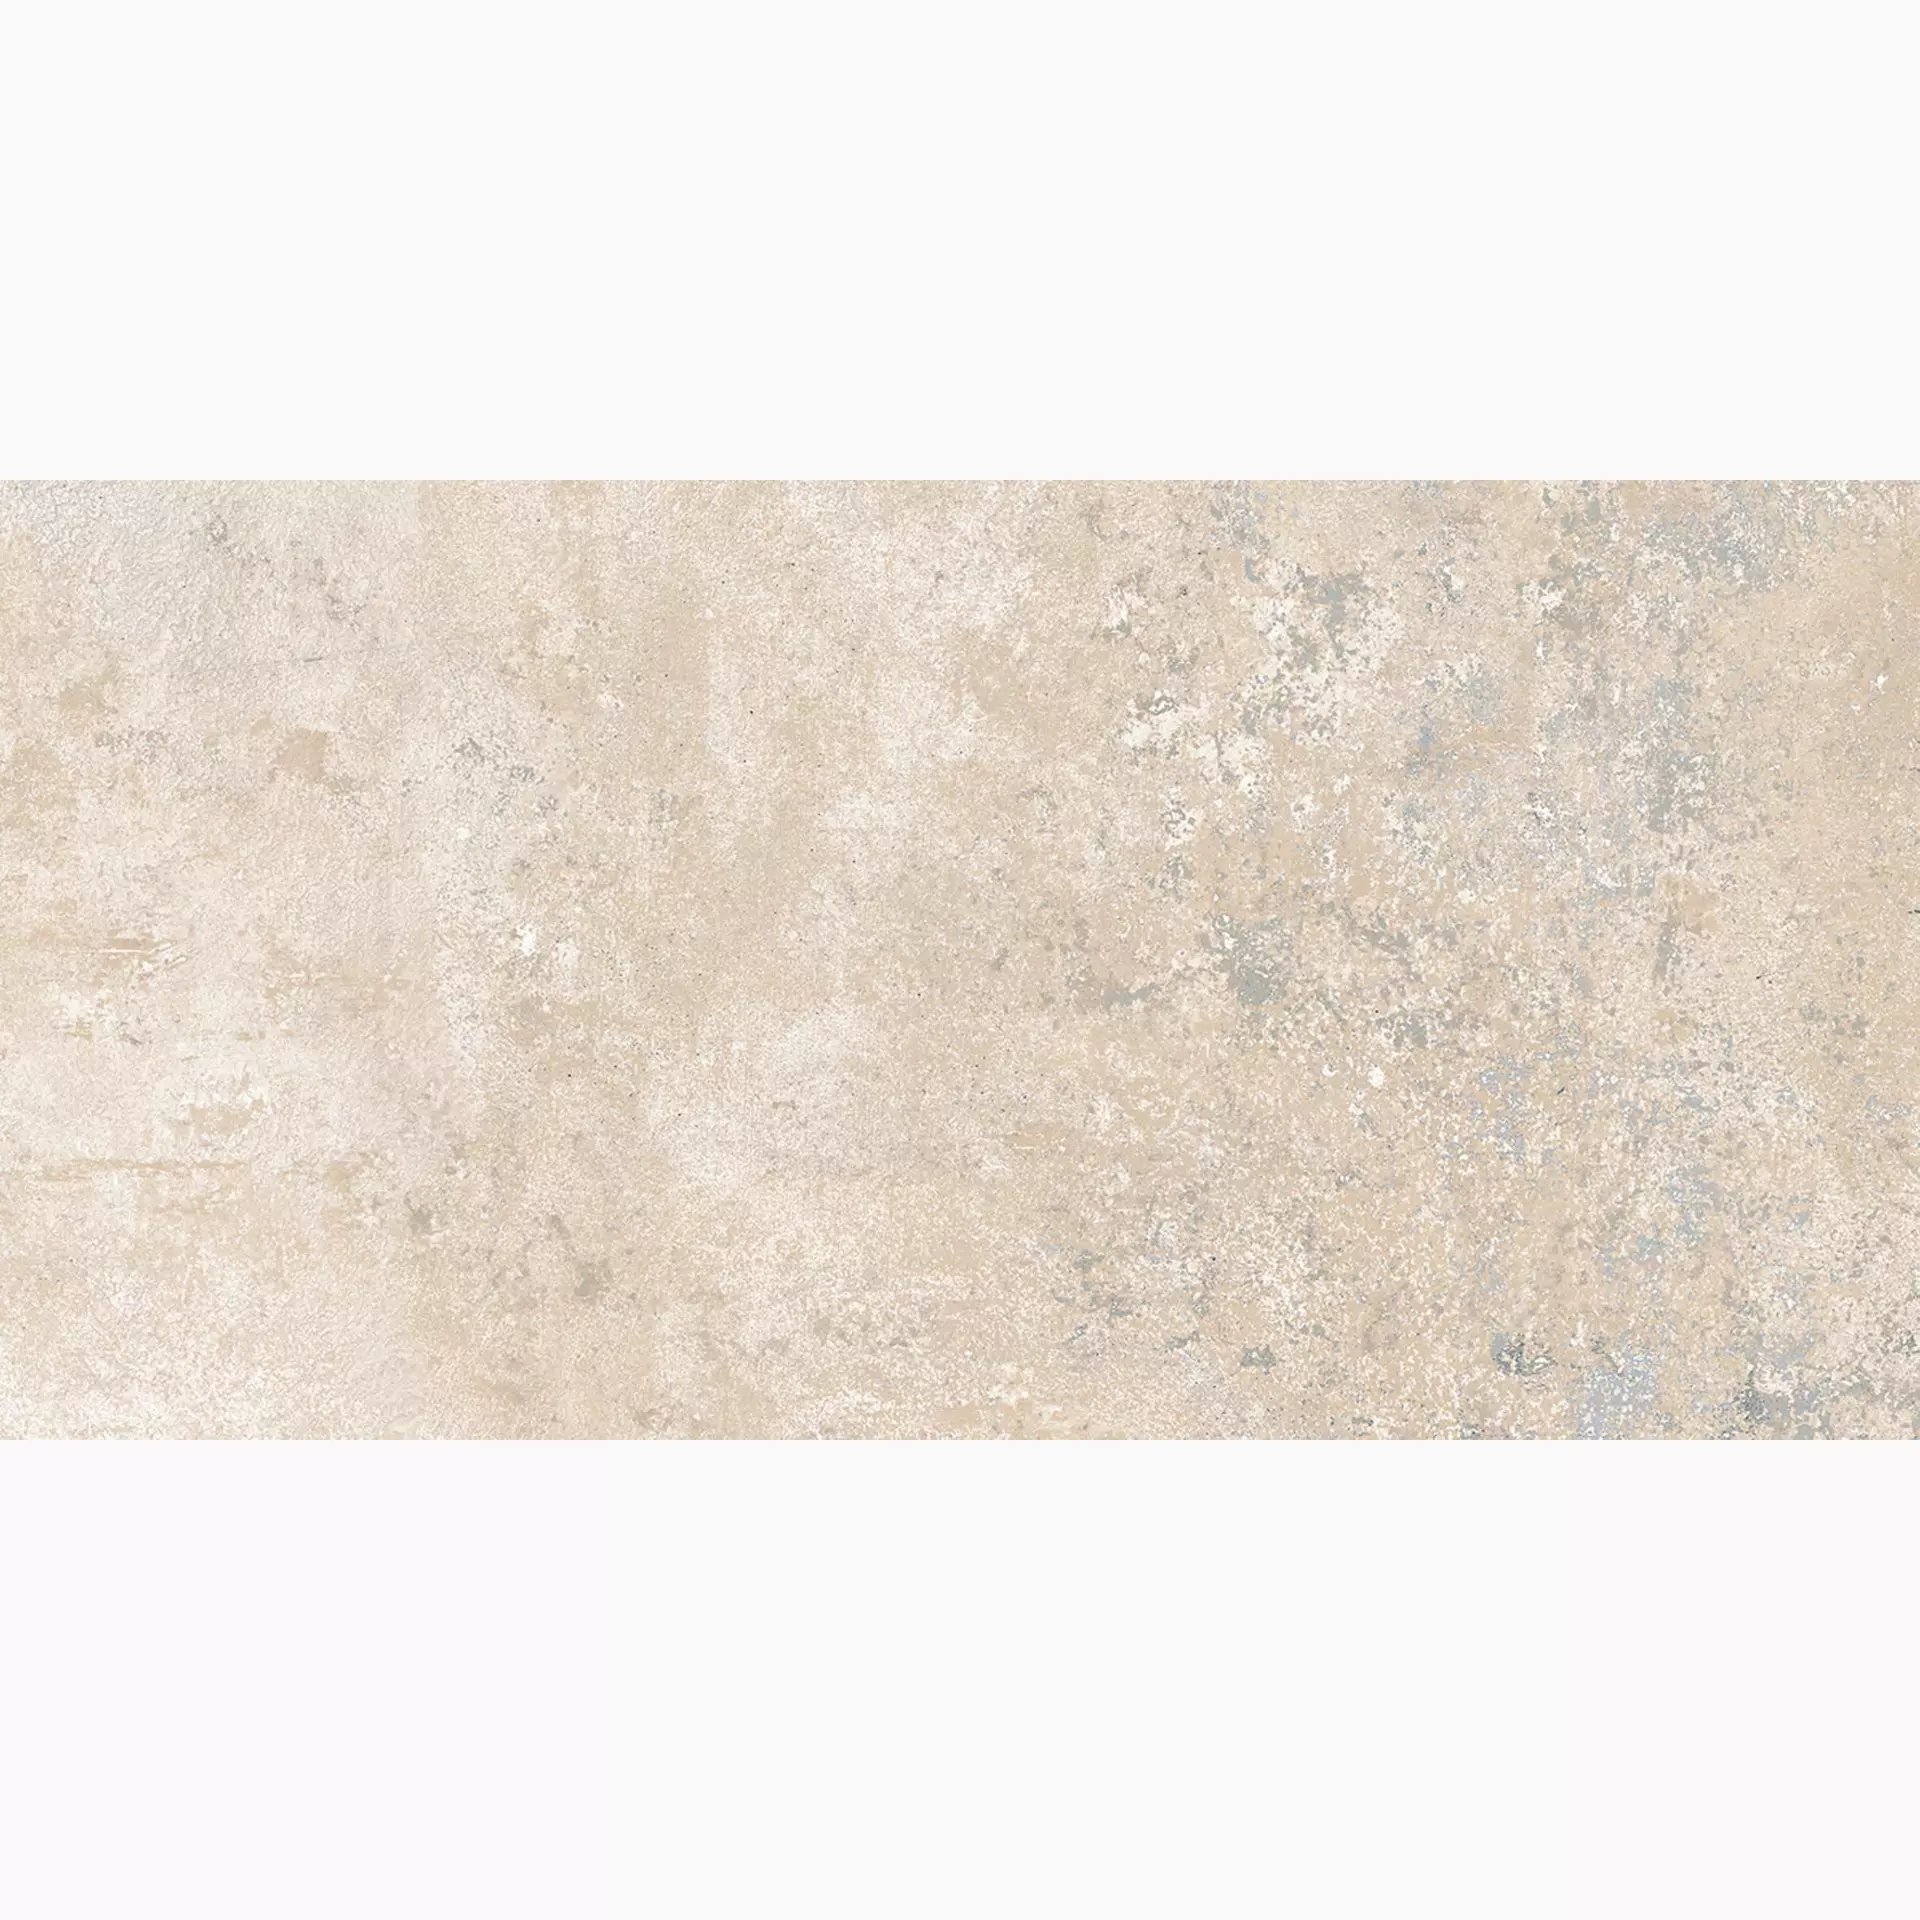 ABK Ghost Clay Naturale PF60005091 30x60cm rectified 8,5mm